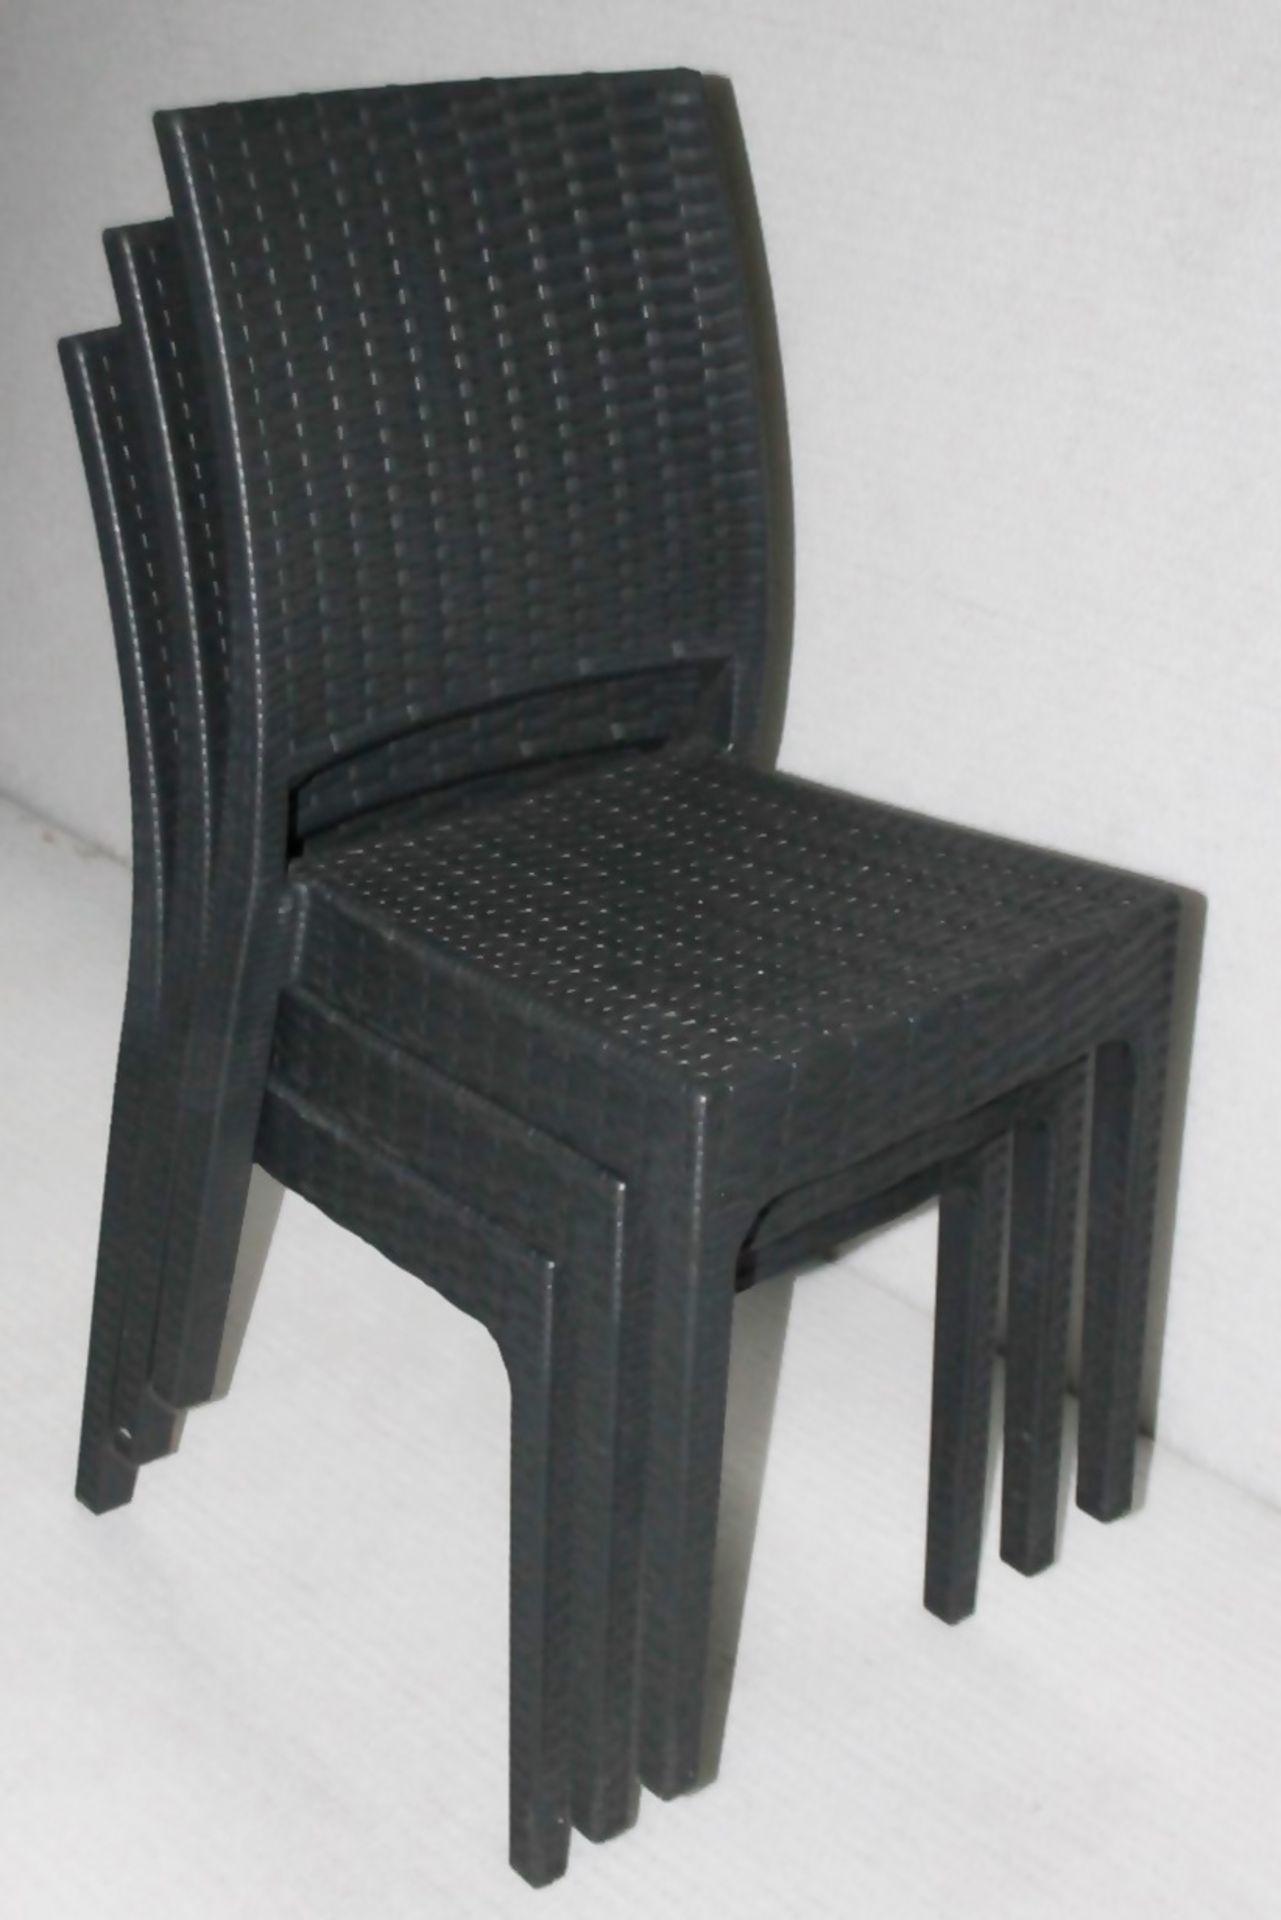 8 x Siesta 'Florida' Rattan Style Garden Chairs In Dark Grey - Suitable For Commercial or Home Use - - Image 4 of 14